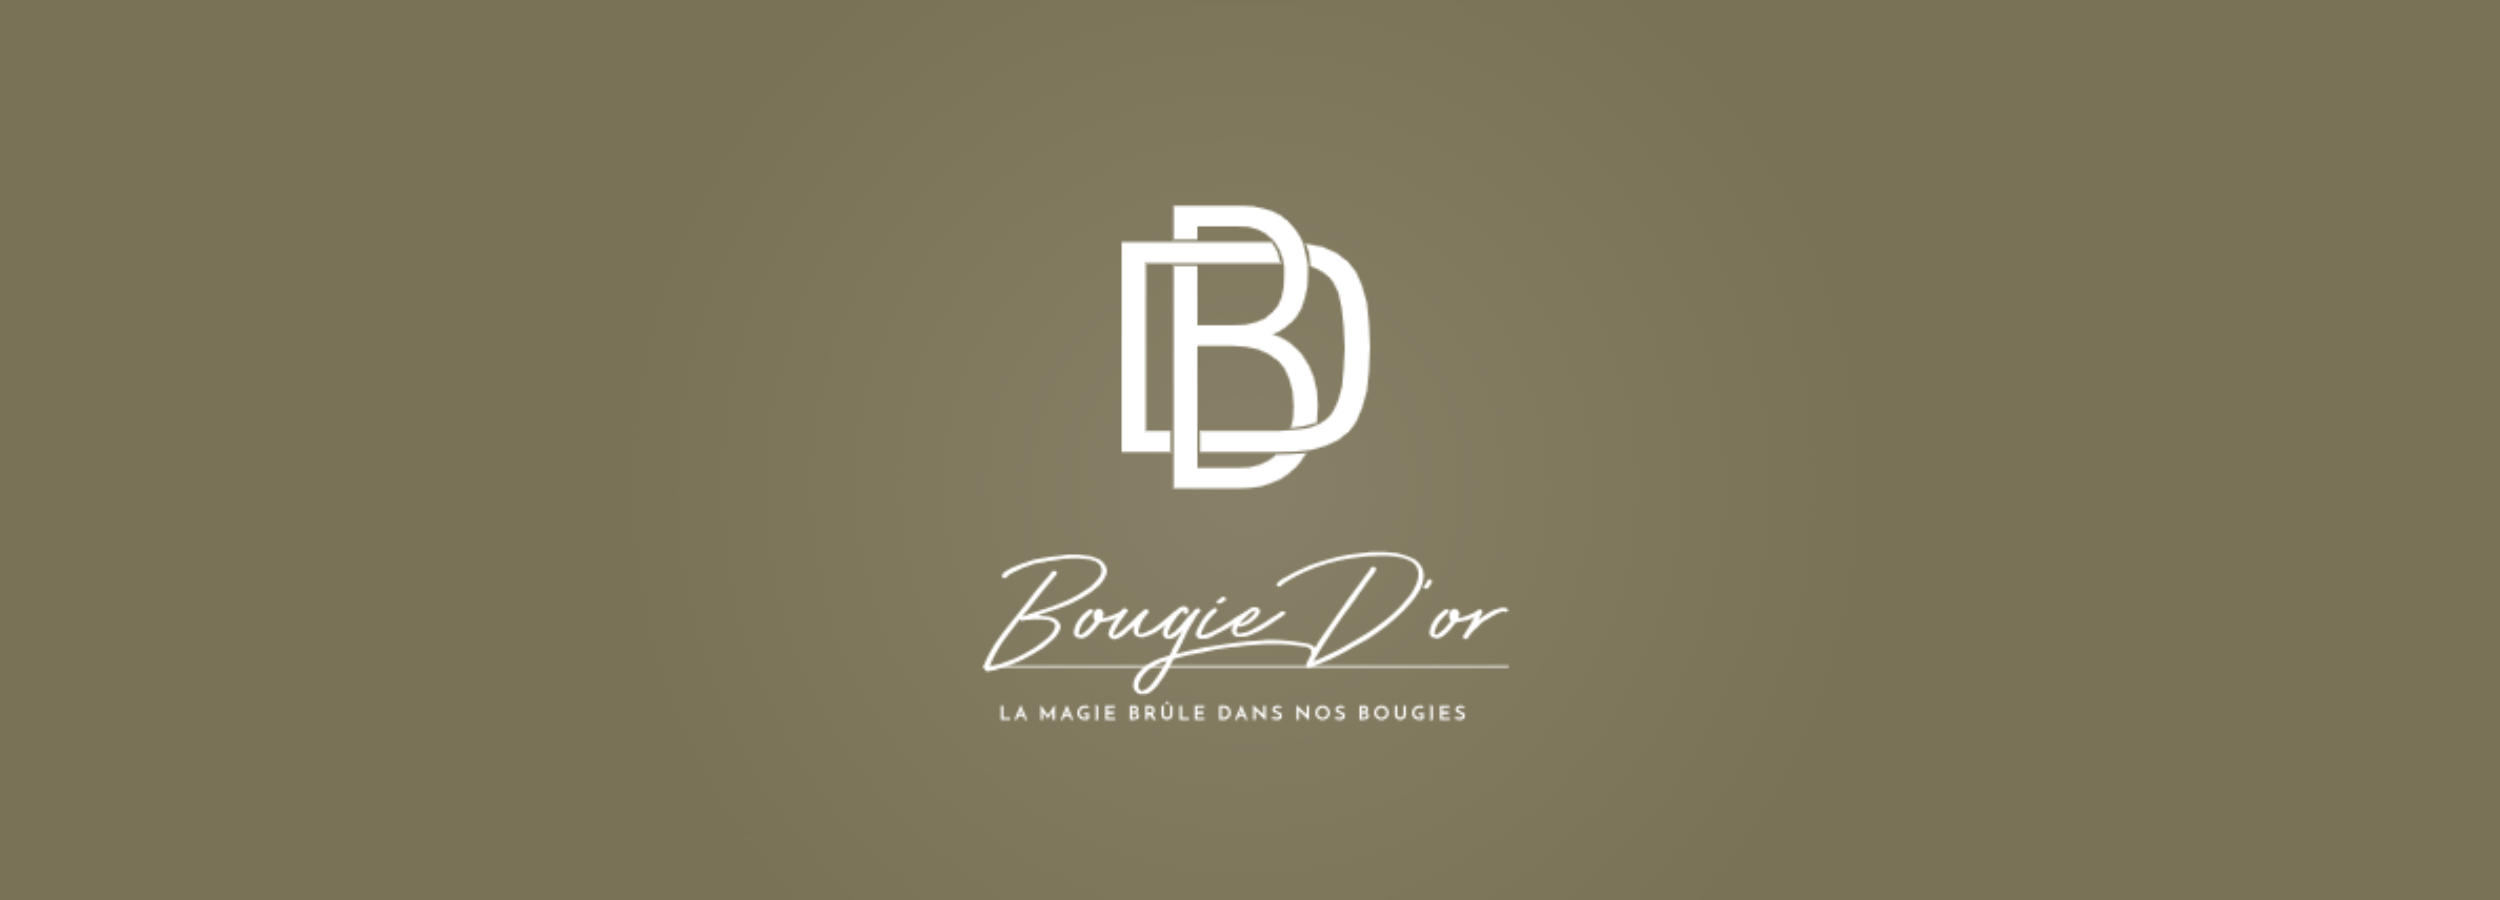 bougie d'or 